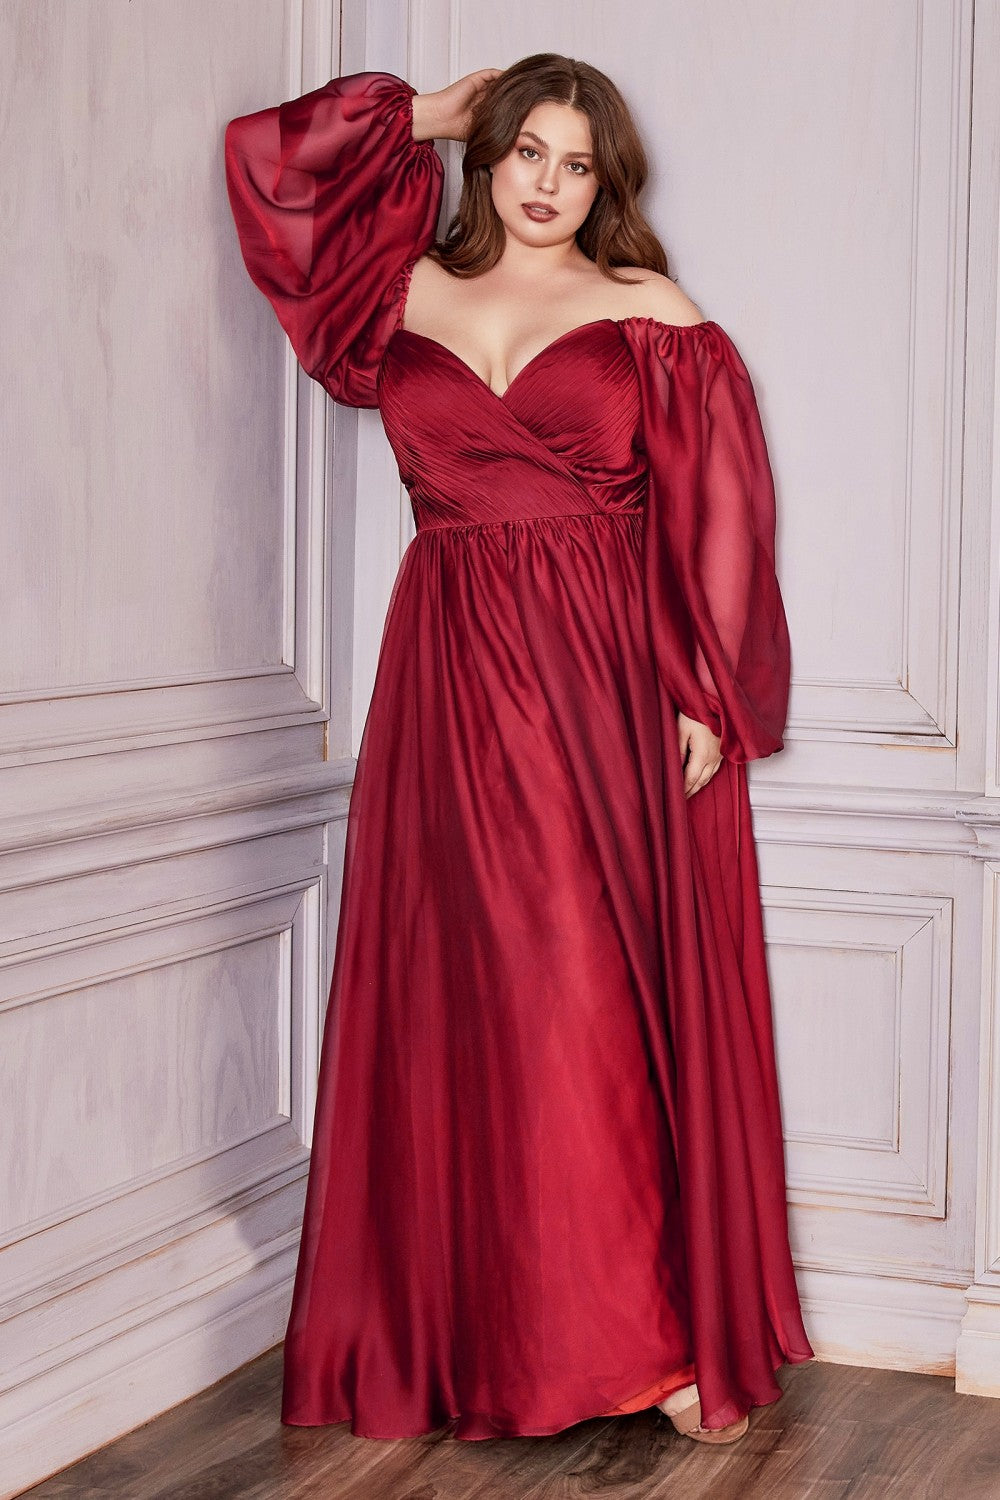 Classic Evening & Prom Dresses Long Sleeves Bodice A-line Chiffon Gown Plus Size Luxury Royal Style CDCD243C Elsy Style Prom Dress